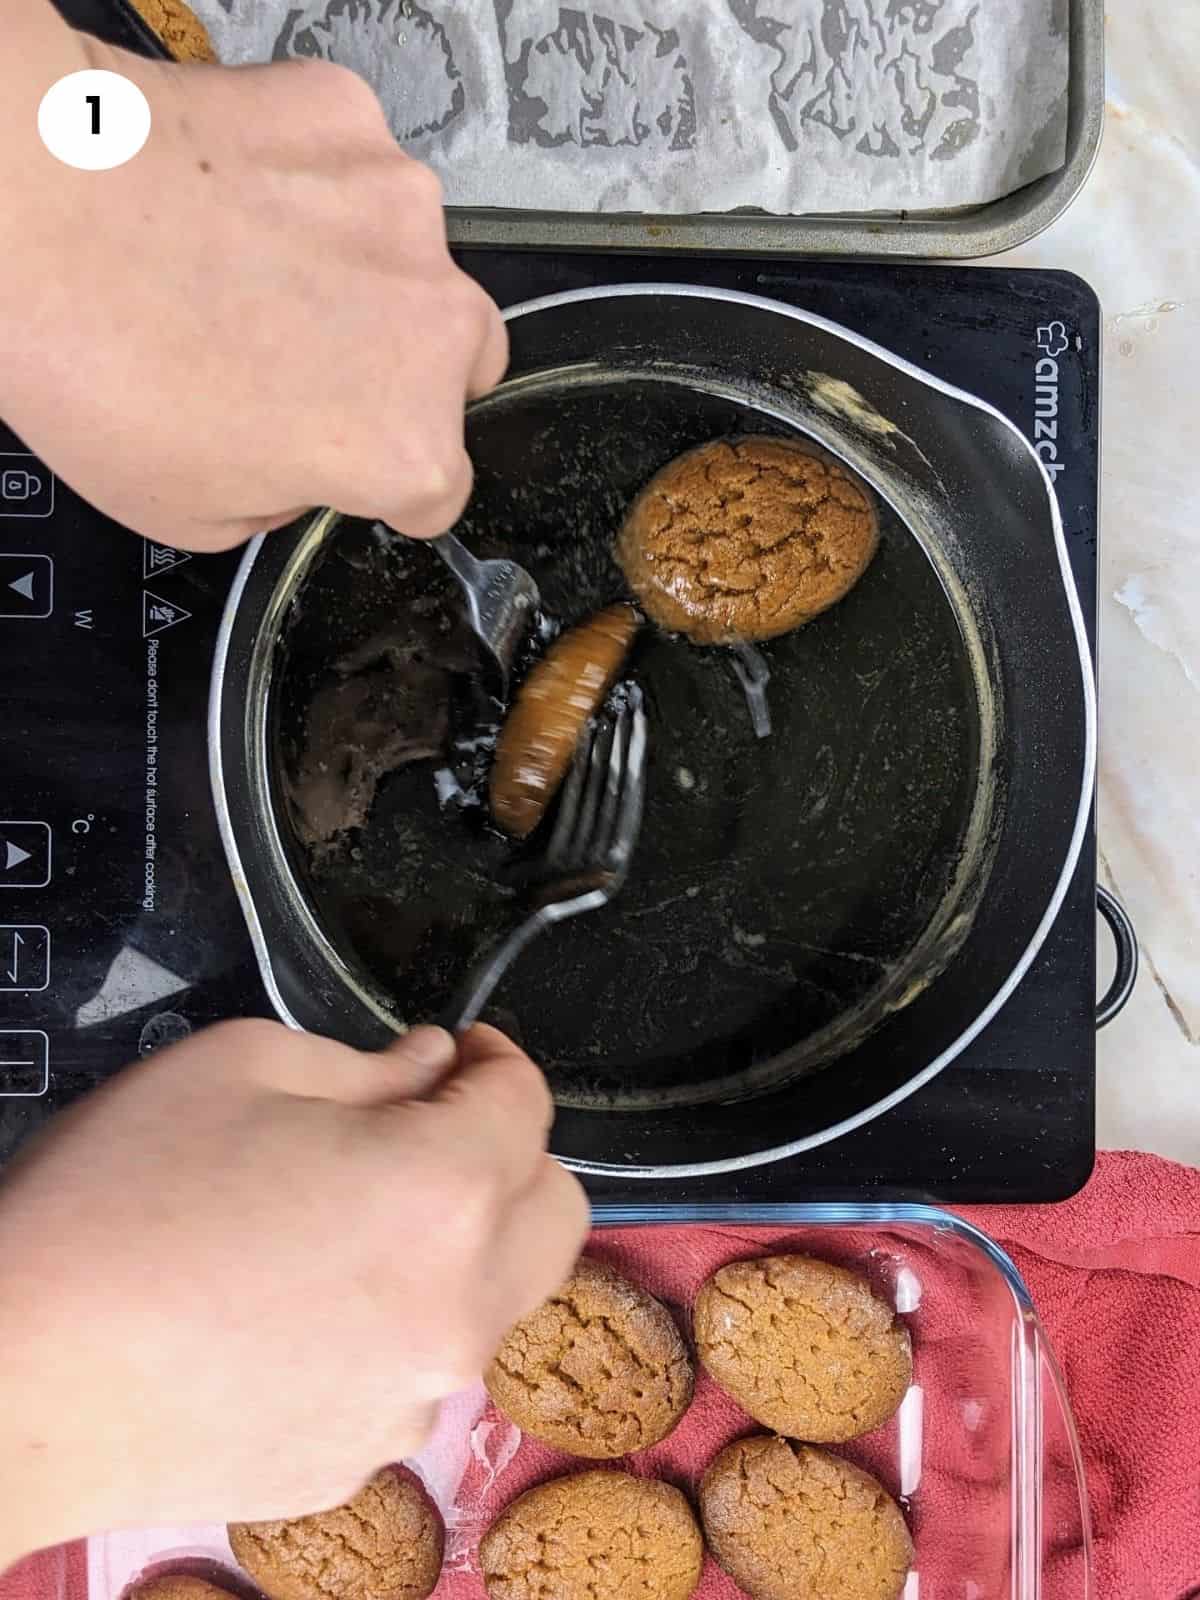 Dipping the melomakarona cookies in syrup.